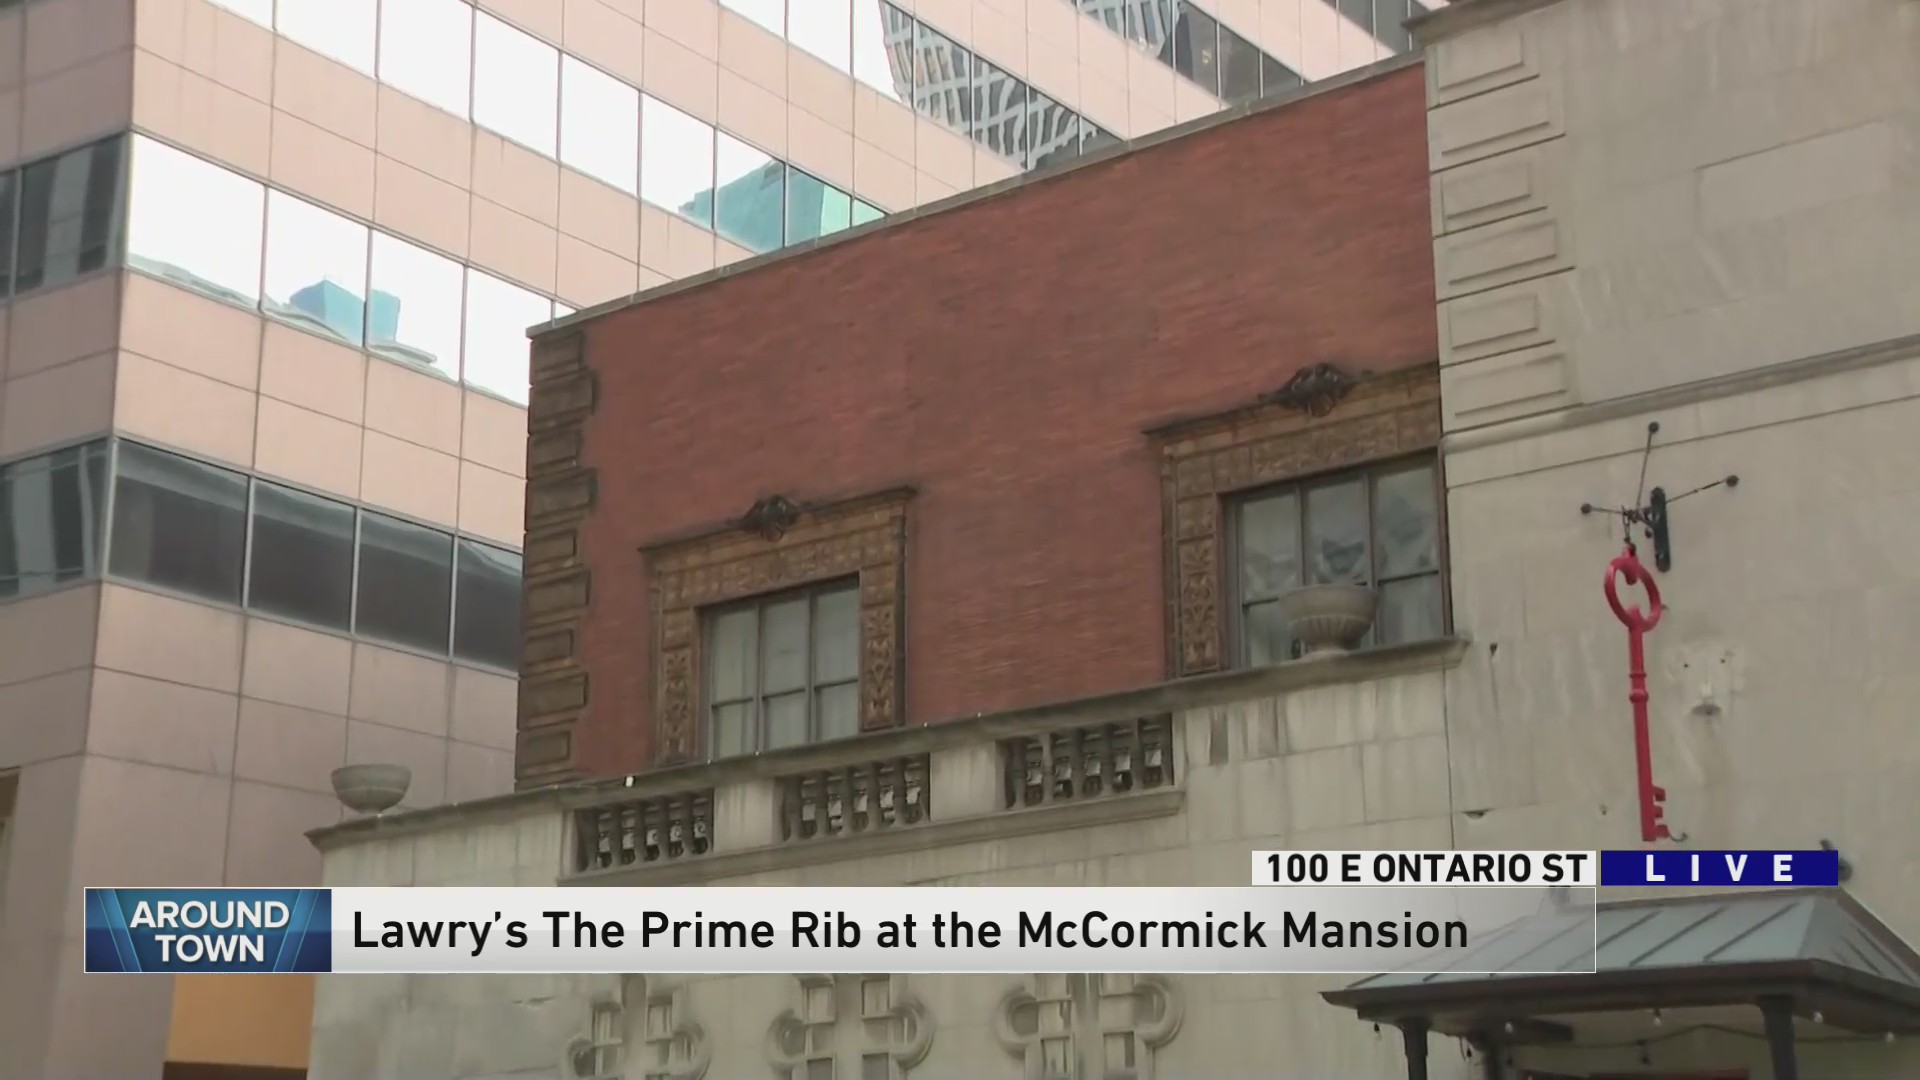 Around Town takes a tour of the historic McCormick Mansion within Lawry’s The Prime Rib